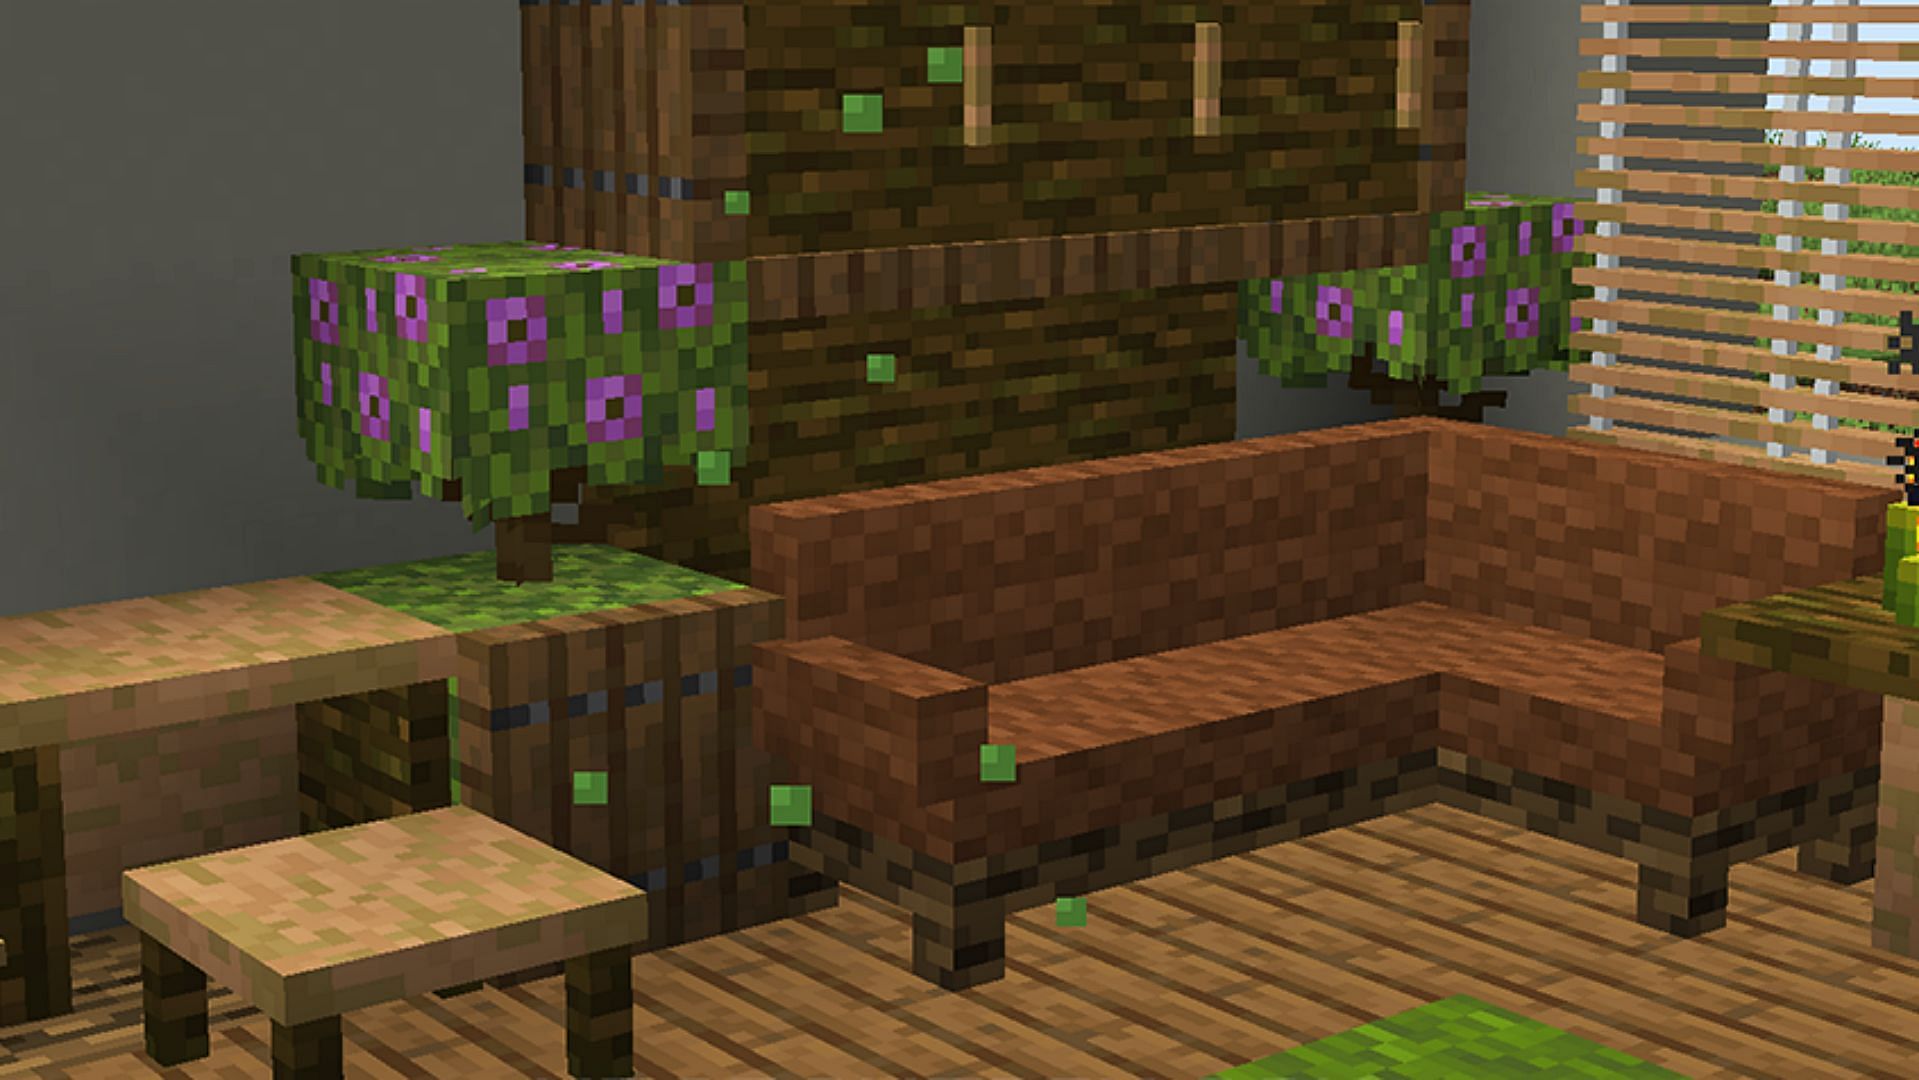 This mod adds various kinds of furniture blocks and items to Minecraft (Image via CurseForge)